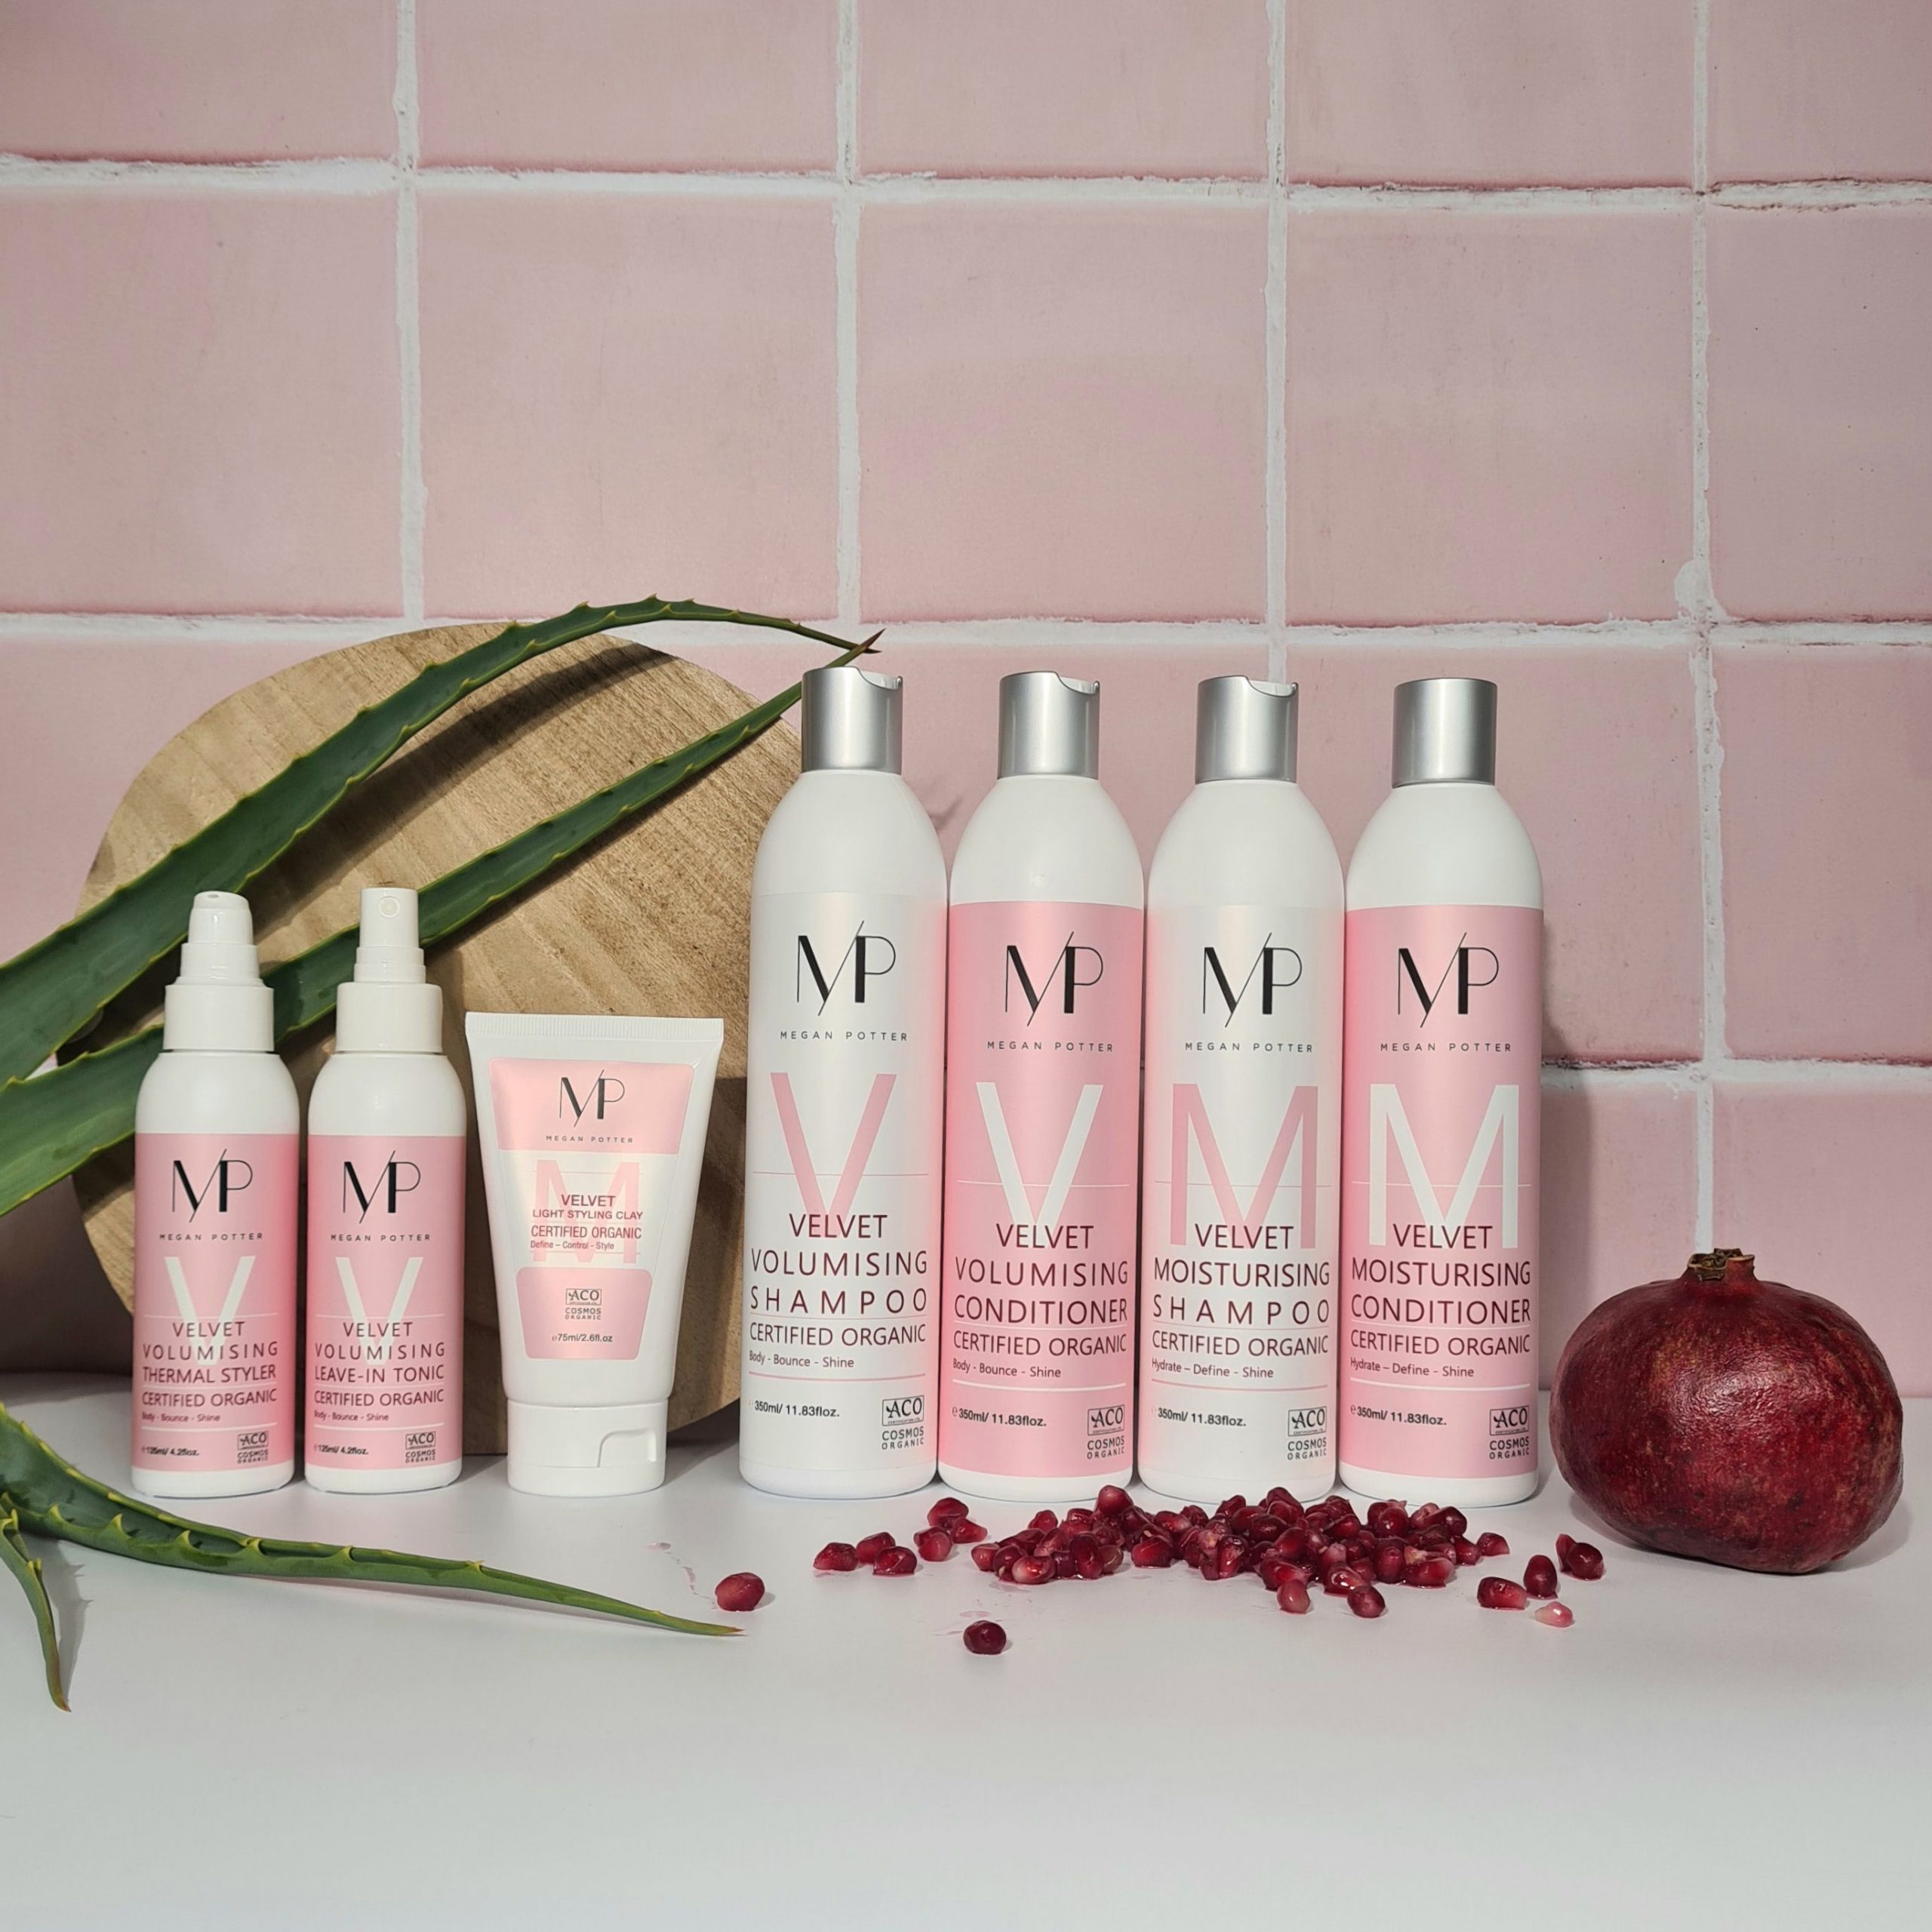 WIN all of the products in the brand new Megan Potter certified organic Velvet Collection hair care range